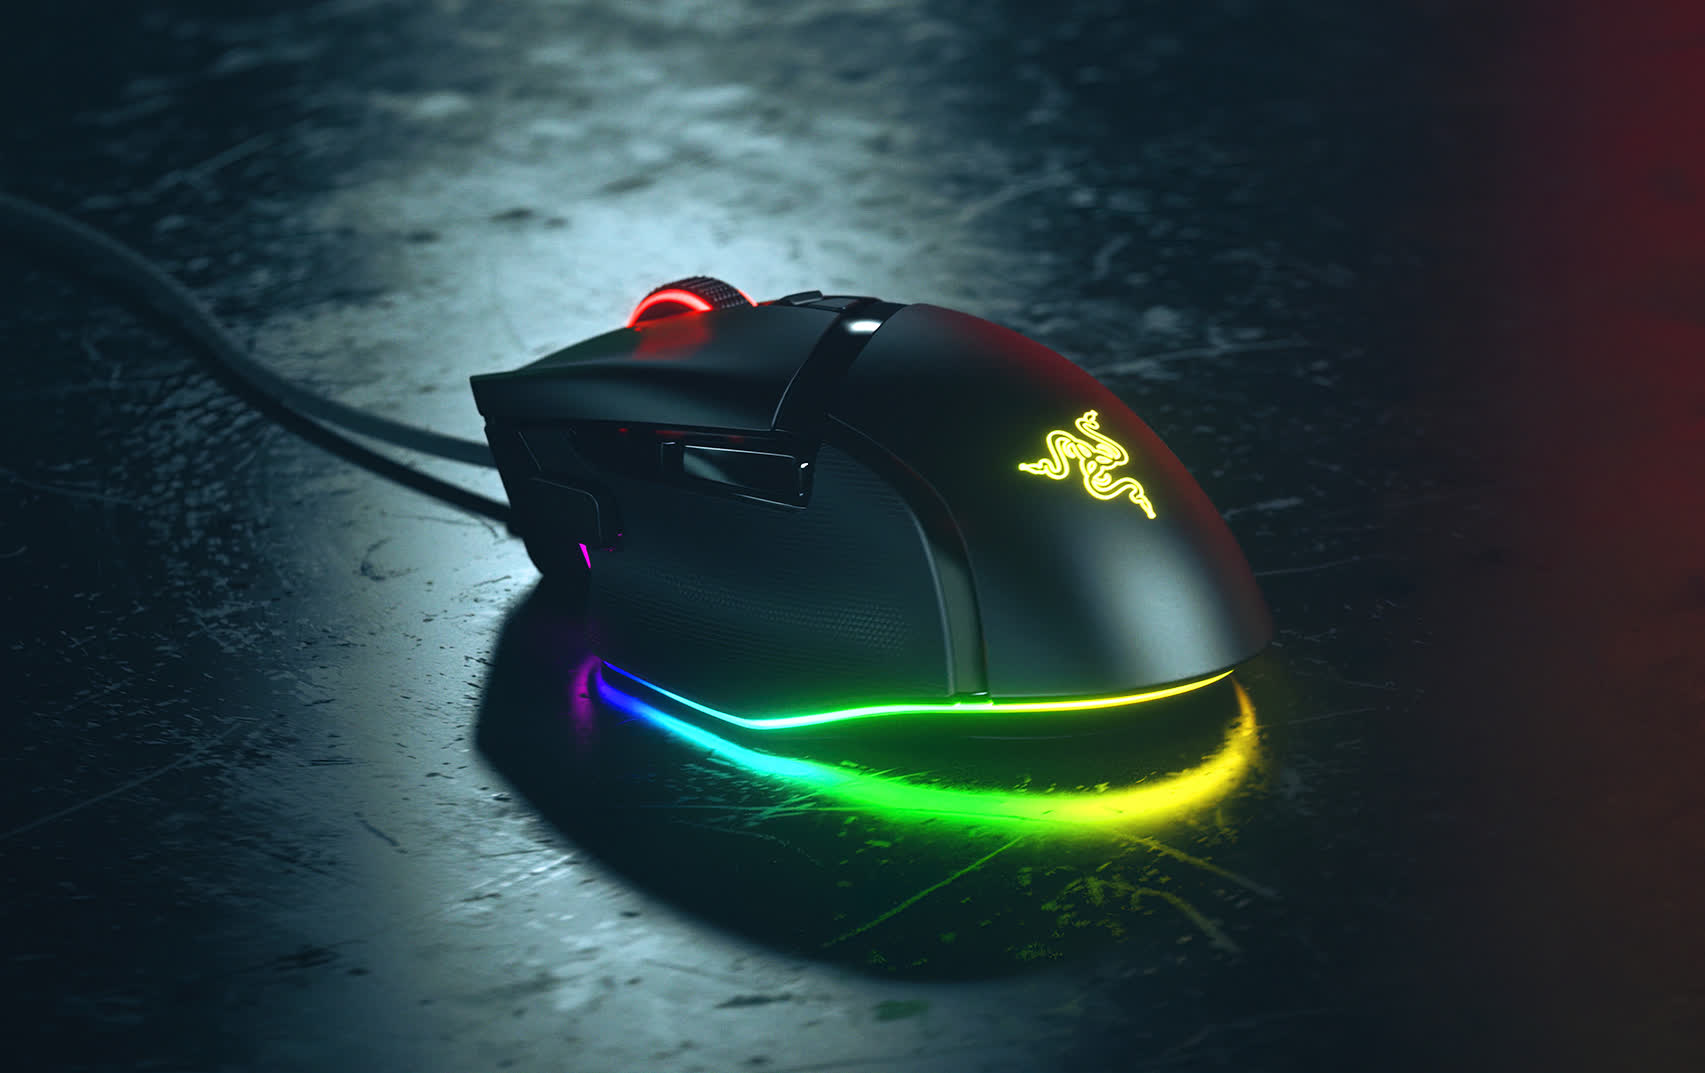 Razer launches Basilisk V3 wired gaming mouse with auto-shifting scroll wheel